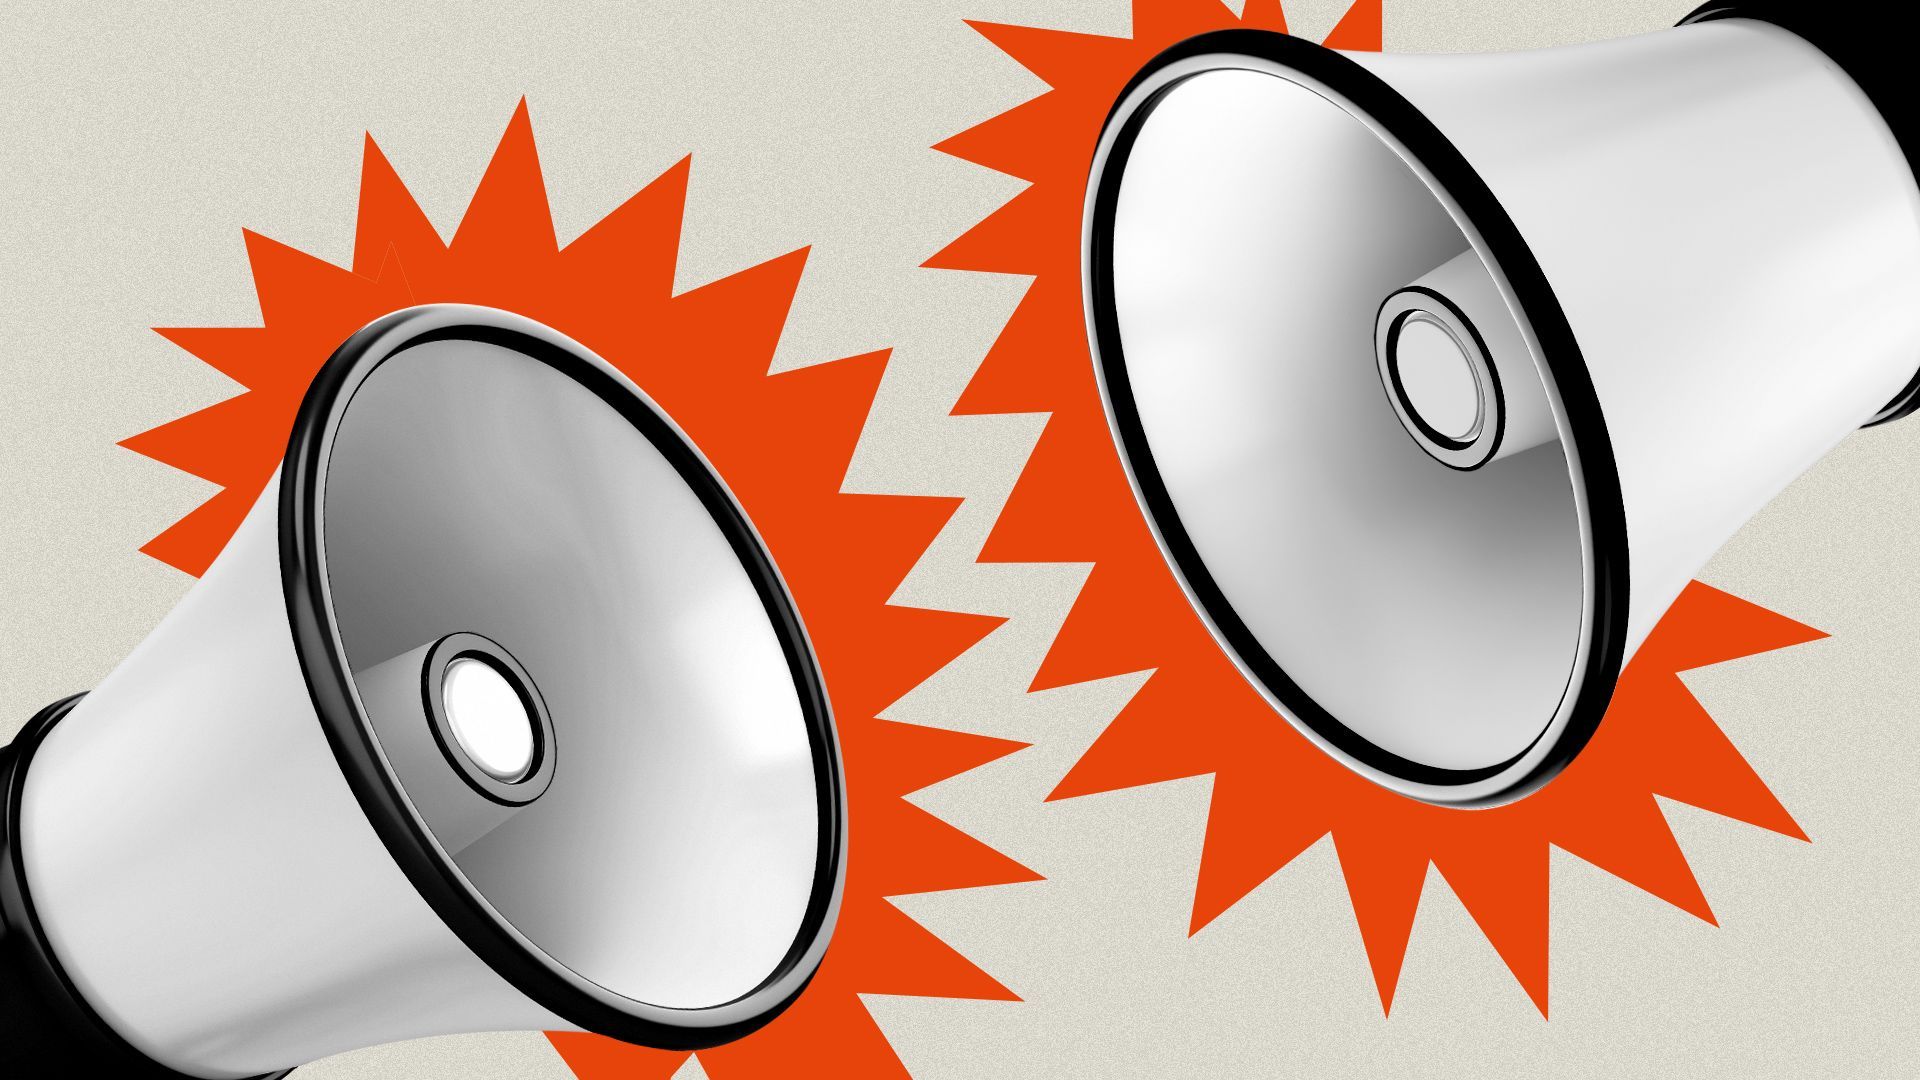 Illustration of two megaphones facing off, shouting at each other with abstract vector shapes behind the megaphones indicating loud noises. 